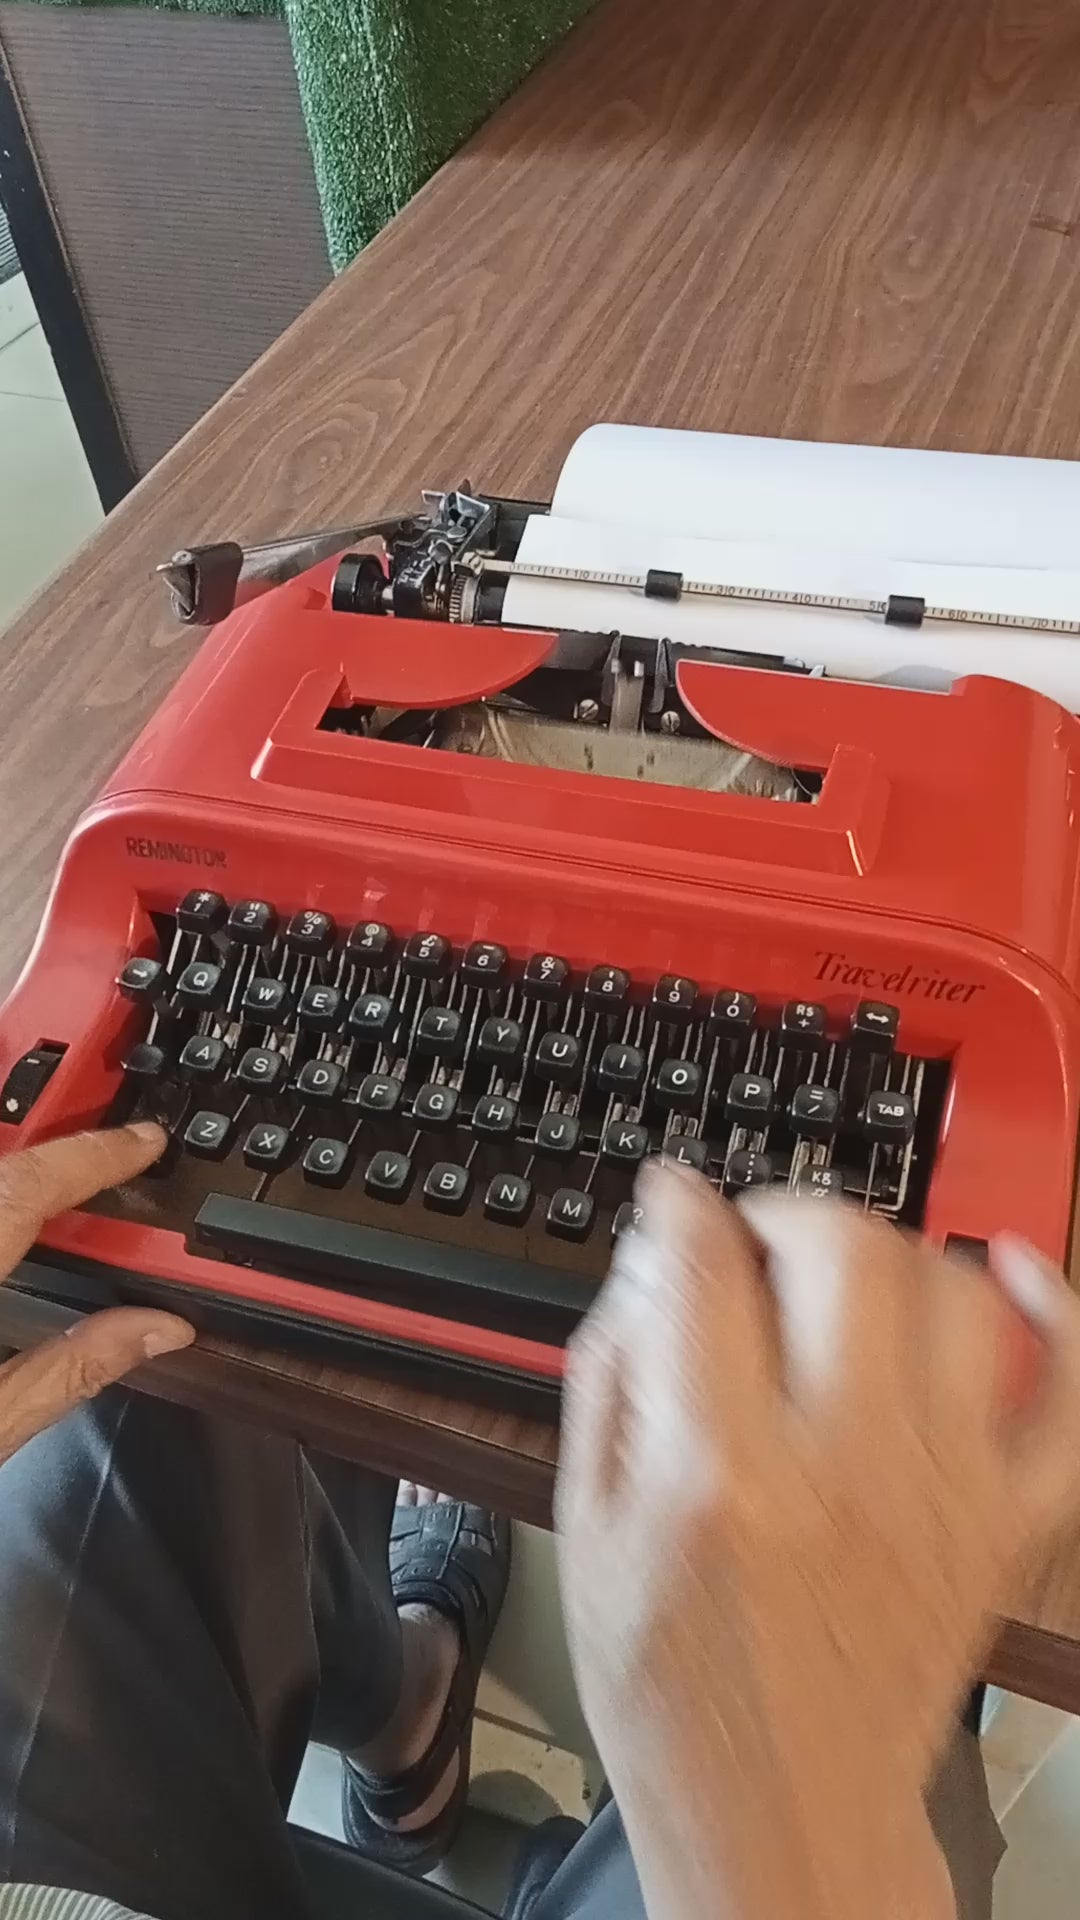 Video of Remington Travelriter Typewriter. Available from universaltypewritercompany.in